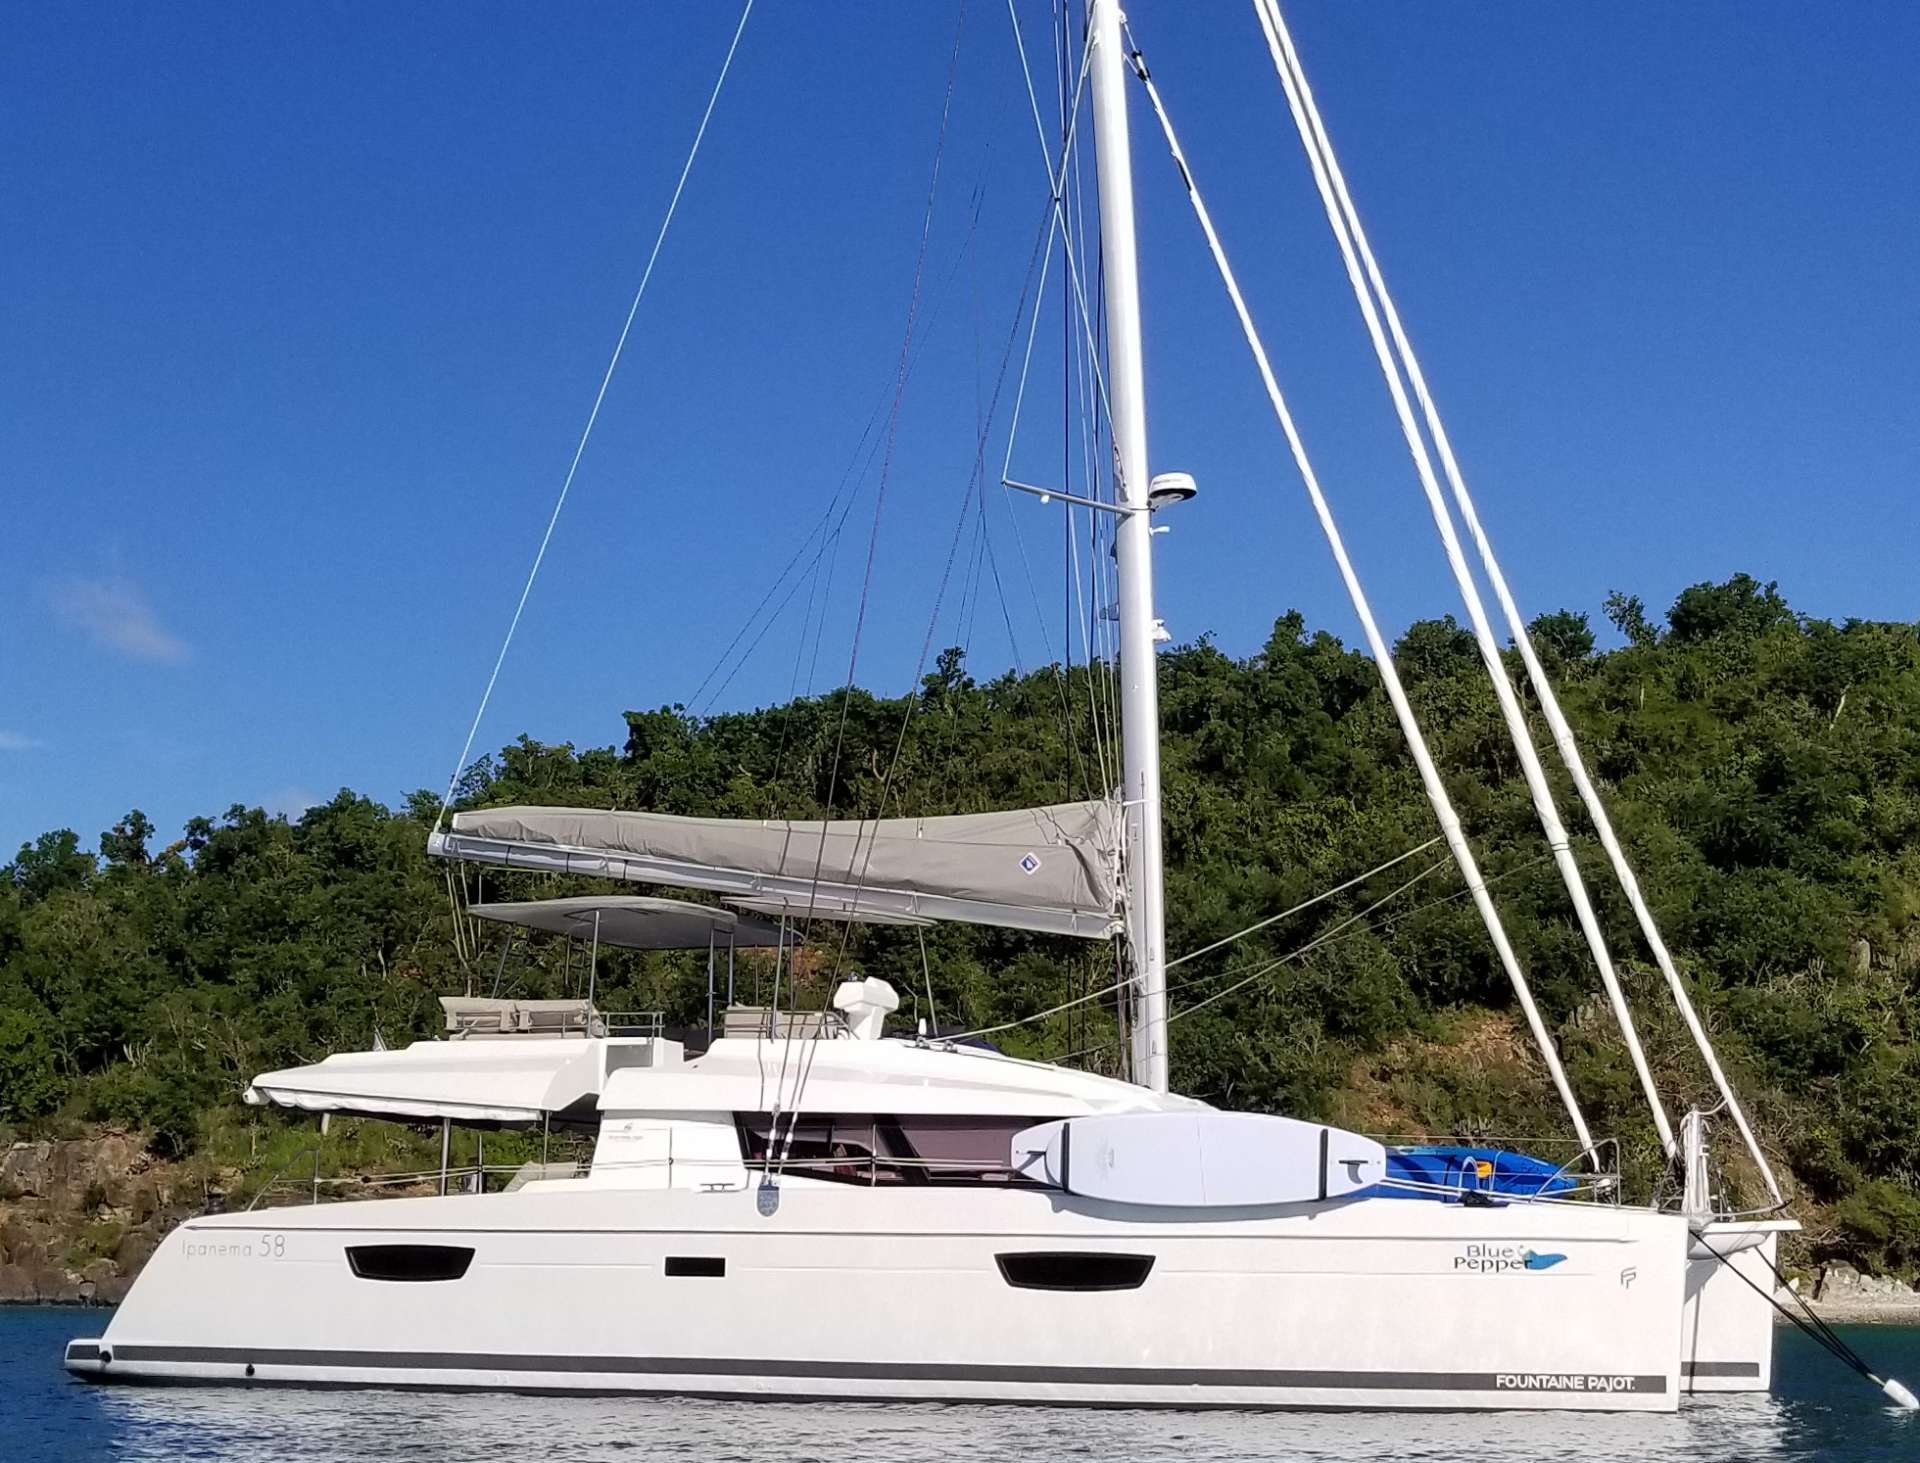 2019 USVI Charter Yacht Show - Best in Show (56&rsquo; to 65&rsquo;)
2019 USVI Charter Yacht Show - 2nd place dessert winner in culinary competition
2019 USVI Charter Yacht Show - Best Themed Yacht Hop
2018 USVI Charter Yacht Show - 1st place in Save the Blue  Water Competition 

BLUE PEPPER offers five guest cabins, each with a queen size berth, en-suite bath with stall shower, electric fresh water flush toilet and vanity. Each guest cabin has an individual control for the A/C to ensure your comfort. There is a very spacious salon, large aft deck for lounging and alfresco dining, and a lovely top fly-bridge offering a 360 degree view of paradise and is fully covered with shade awning for clients comfort.